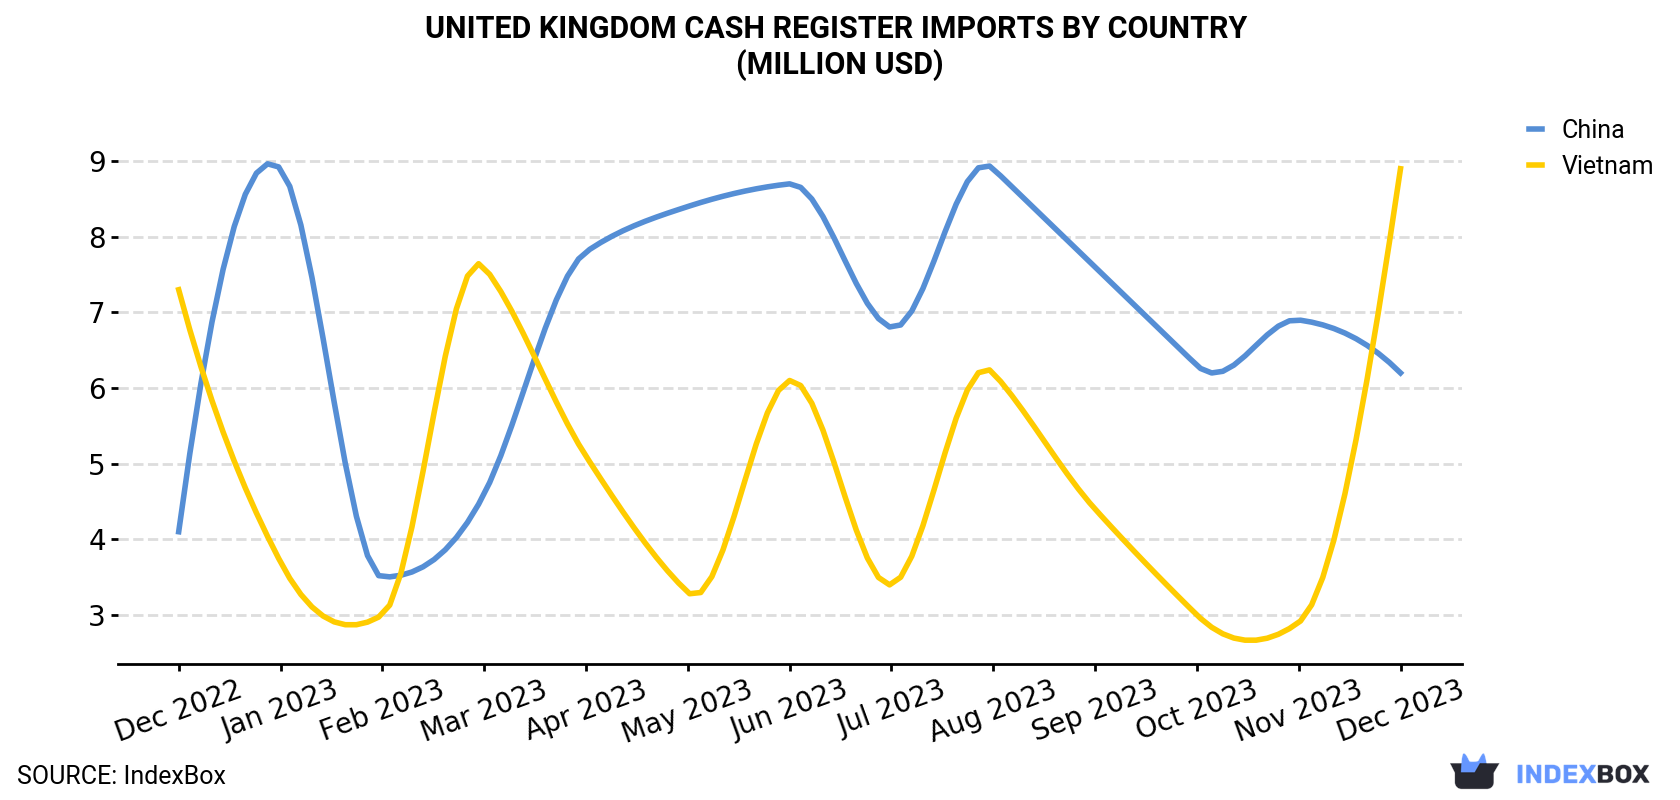 United Kingdom Cash Register Imports By Country (Million USD)